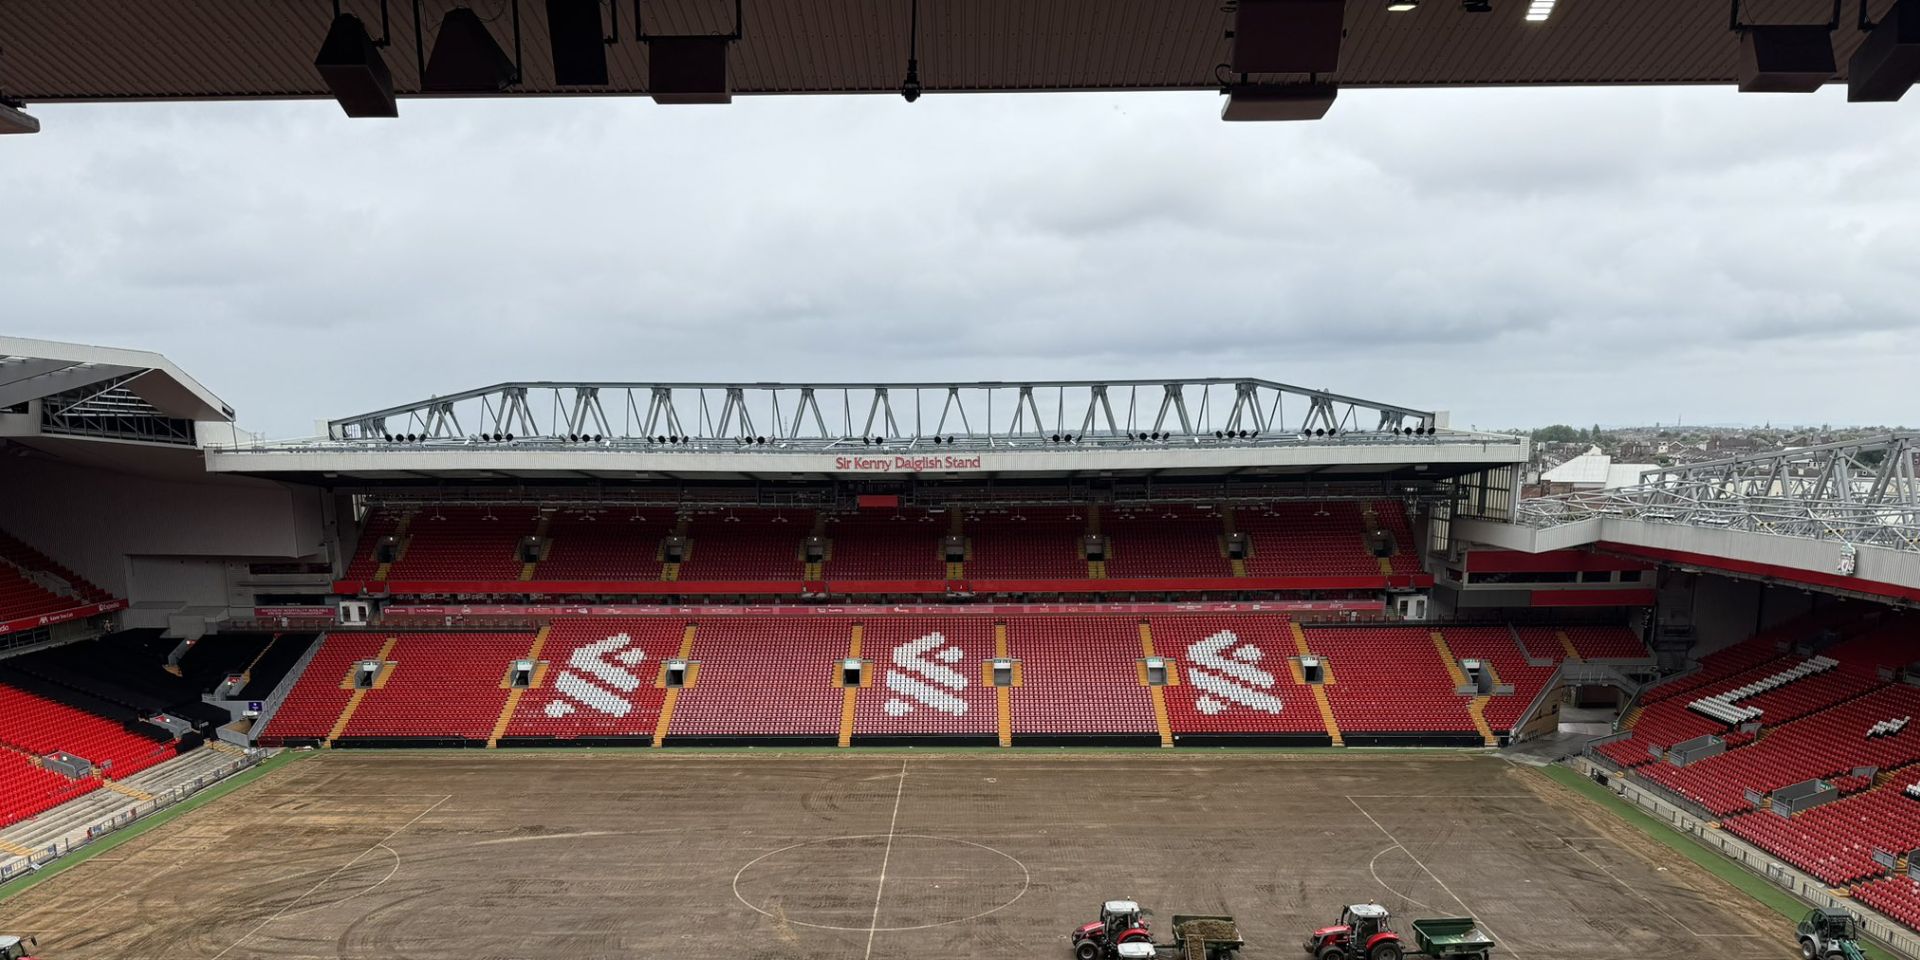 (Image) Fresh Anfield update provided as refurbishment work carried out on pitch